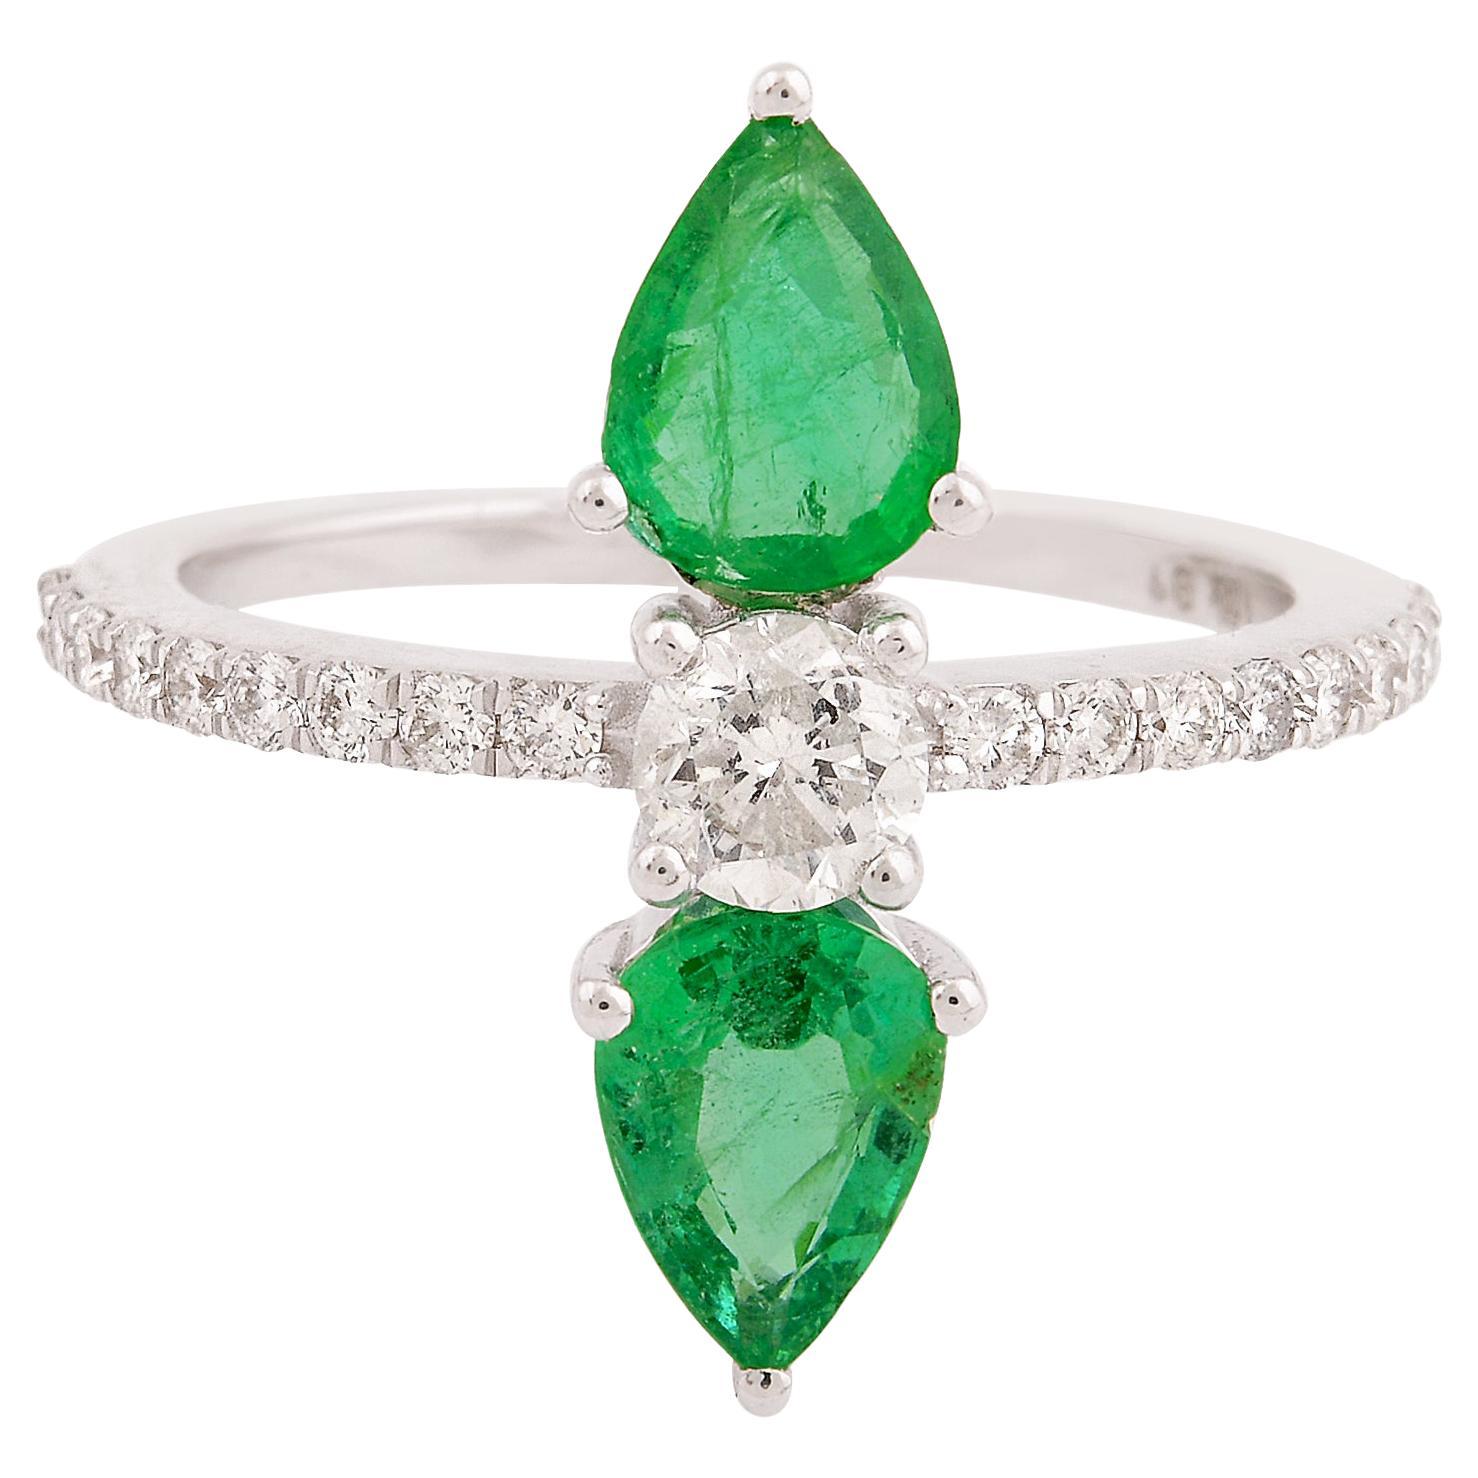 Natural Pear Emerald Gemstone Band Ring Diamond Solid 14k White Gold Jewelry